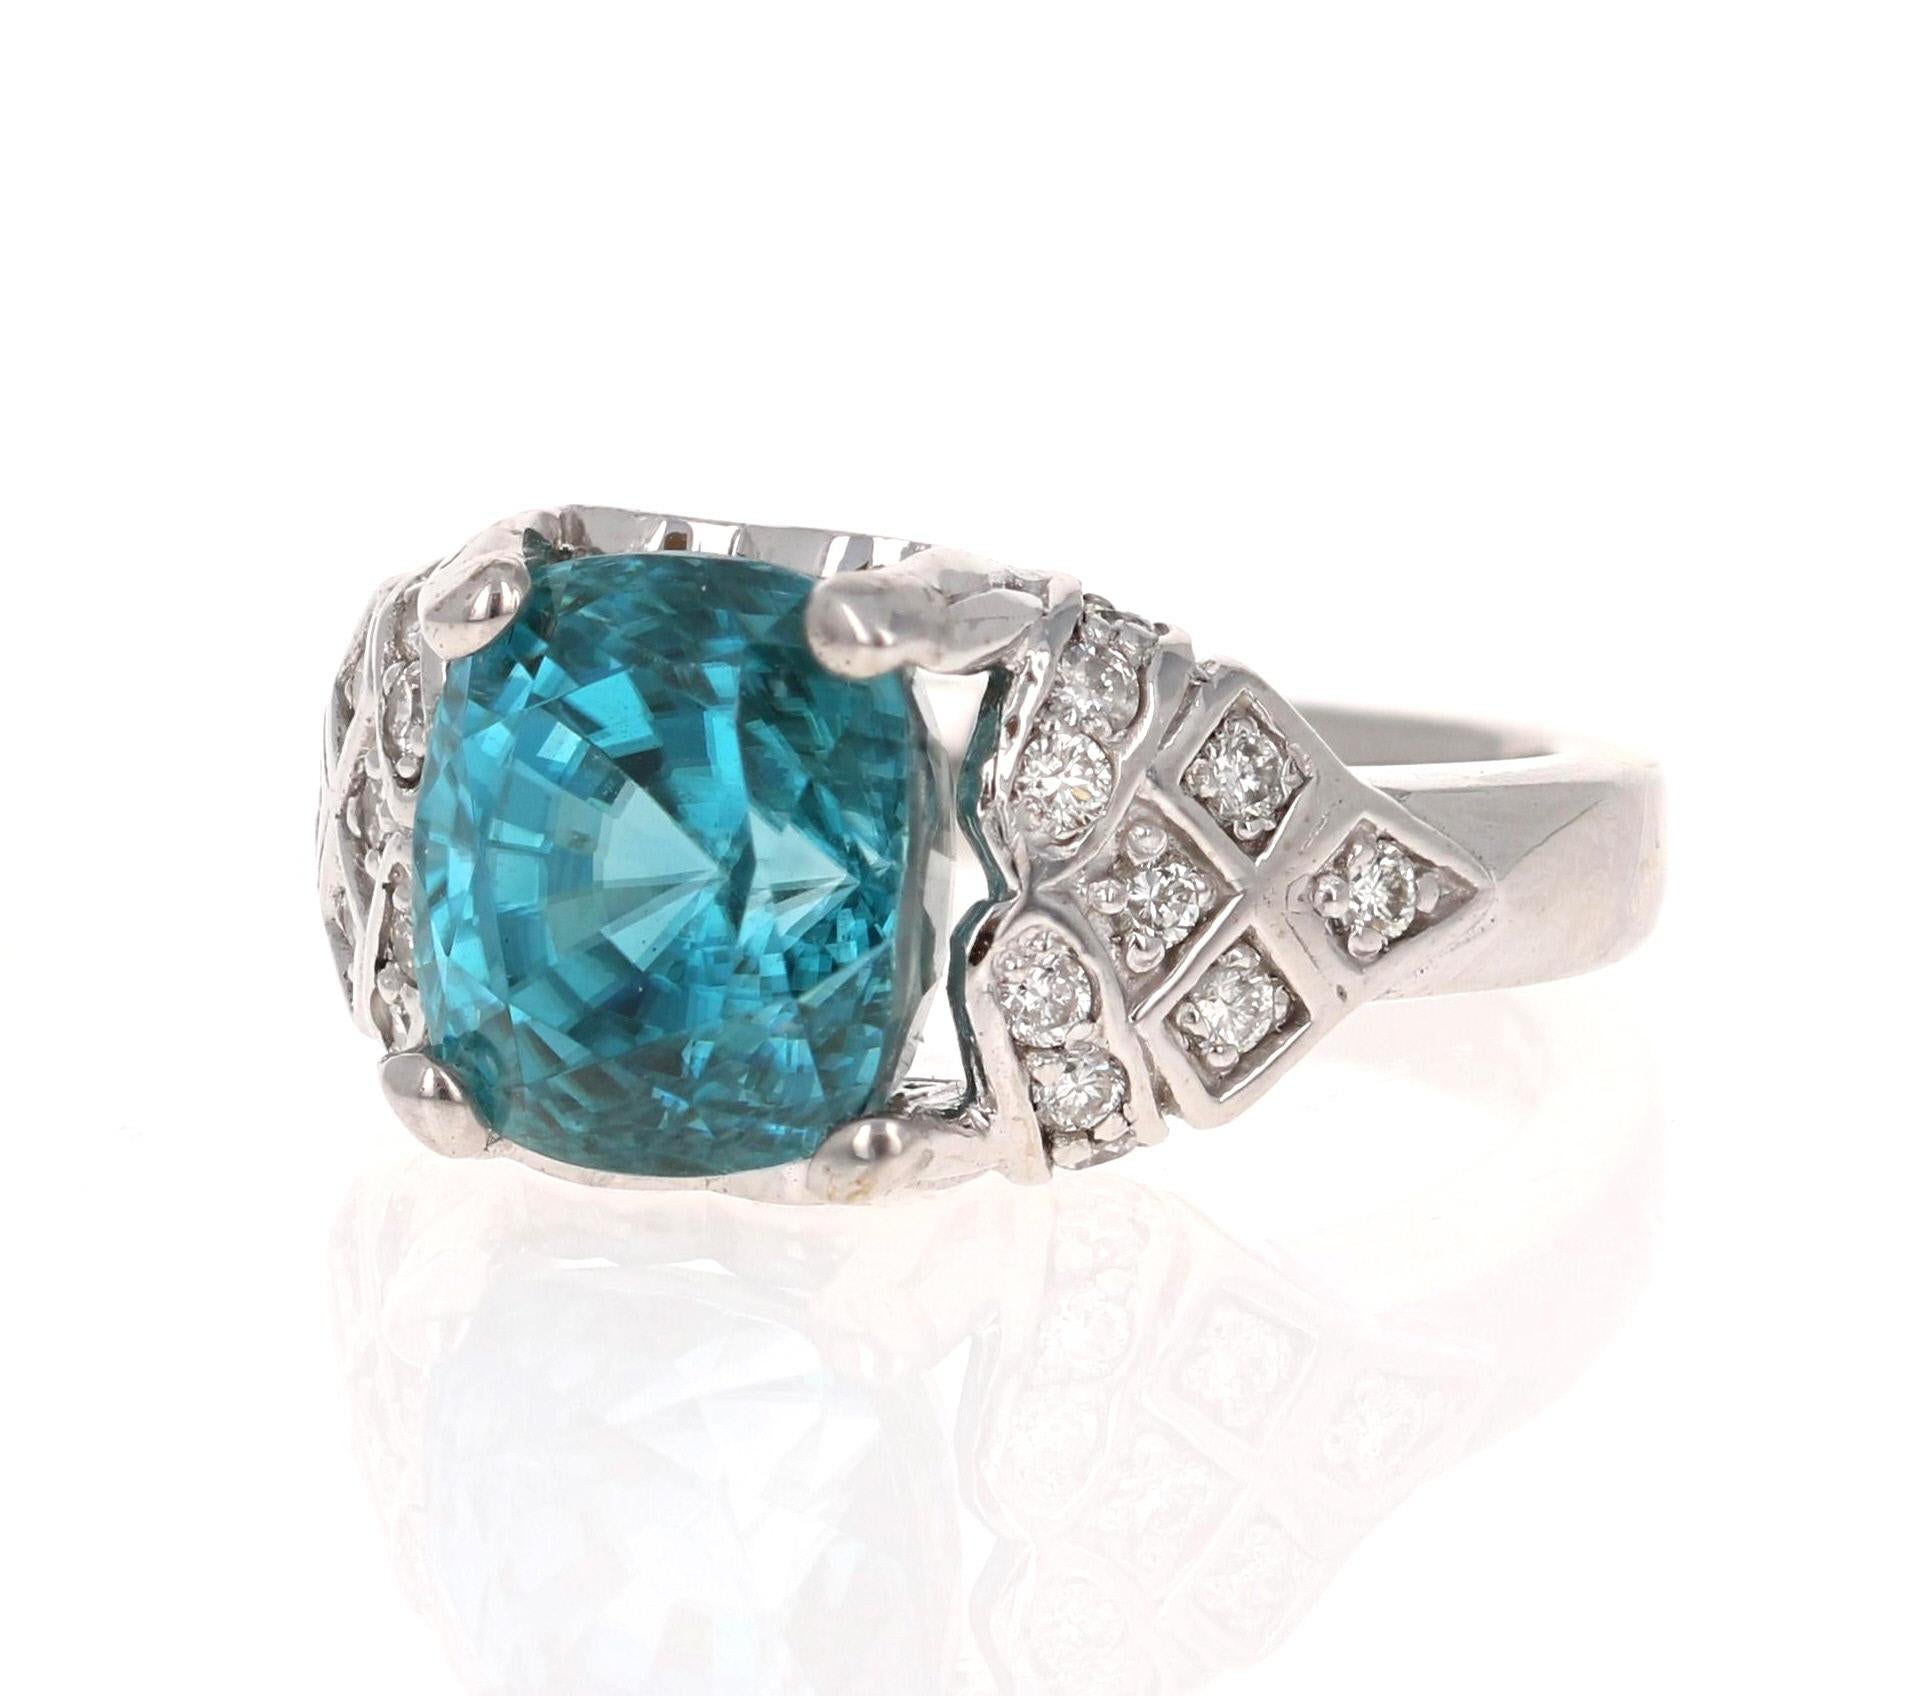 An amazingly deep and beautiful Blue Zircon and Diamond ring that can be a unique Engagement ring for that special someone!
Blue Zircon is a natural stone mined mainly in Sri Lanka, Myanmar, and Australia.  
This ring has a large Cushion/Oval Blue